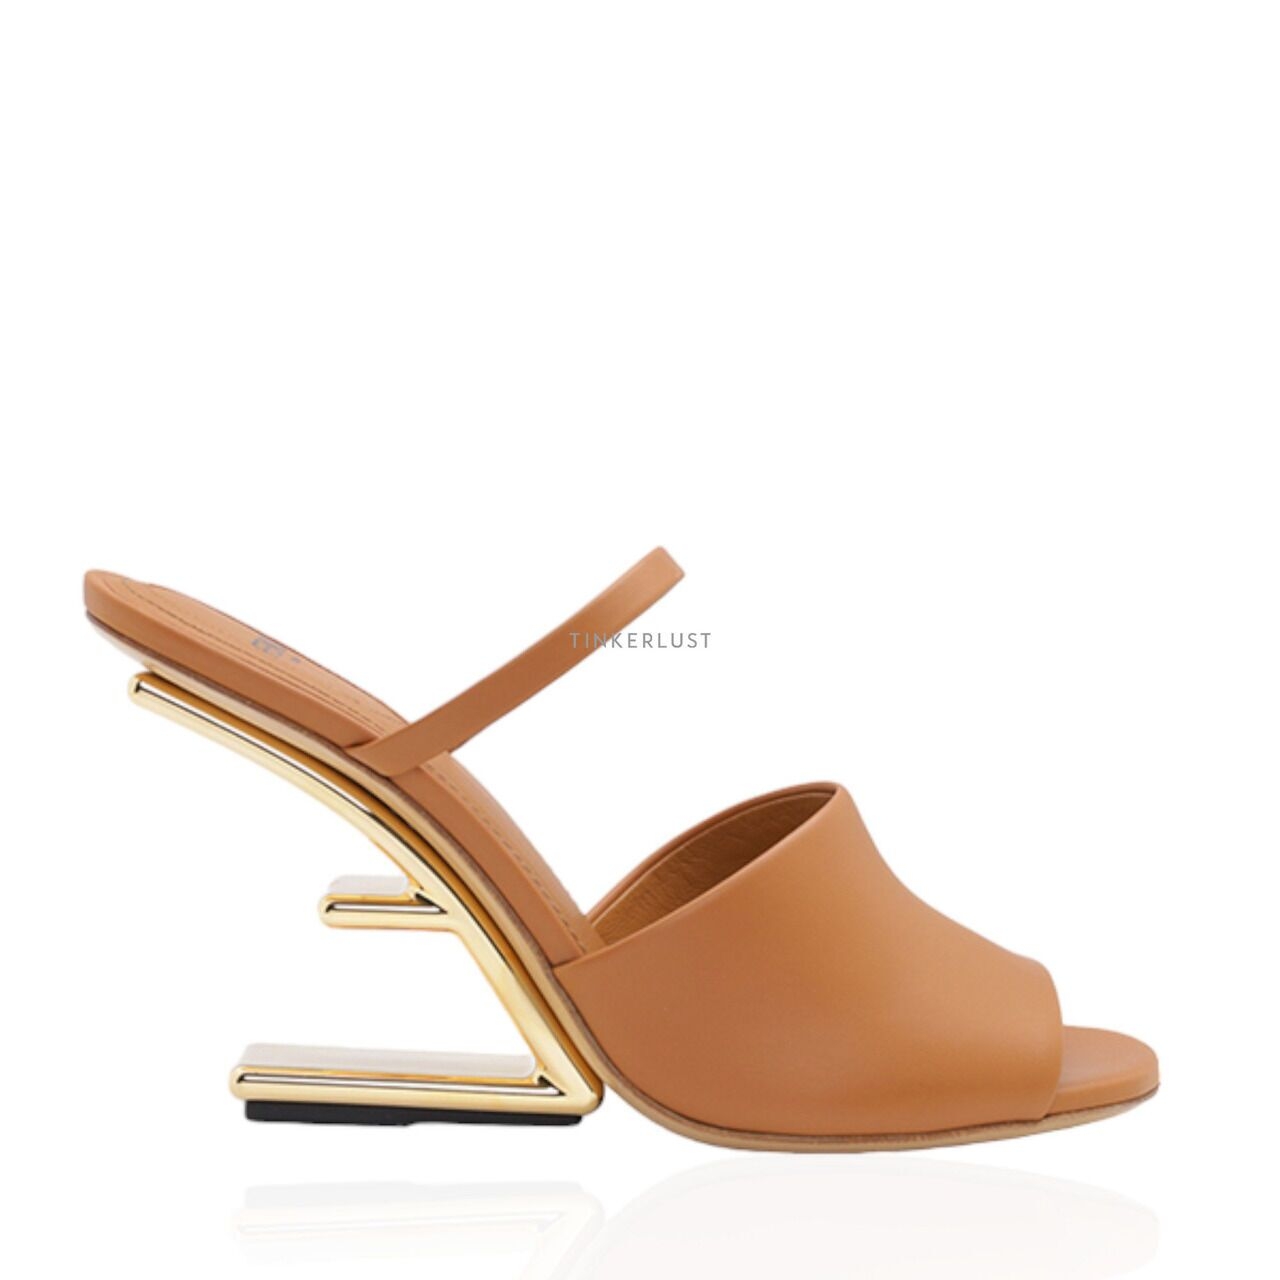 FENDI Women First Open Toe Sandals 105mm in Caramel Leather with Diagonal F-Shaped Heels